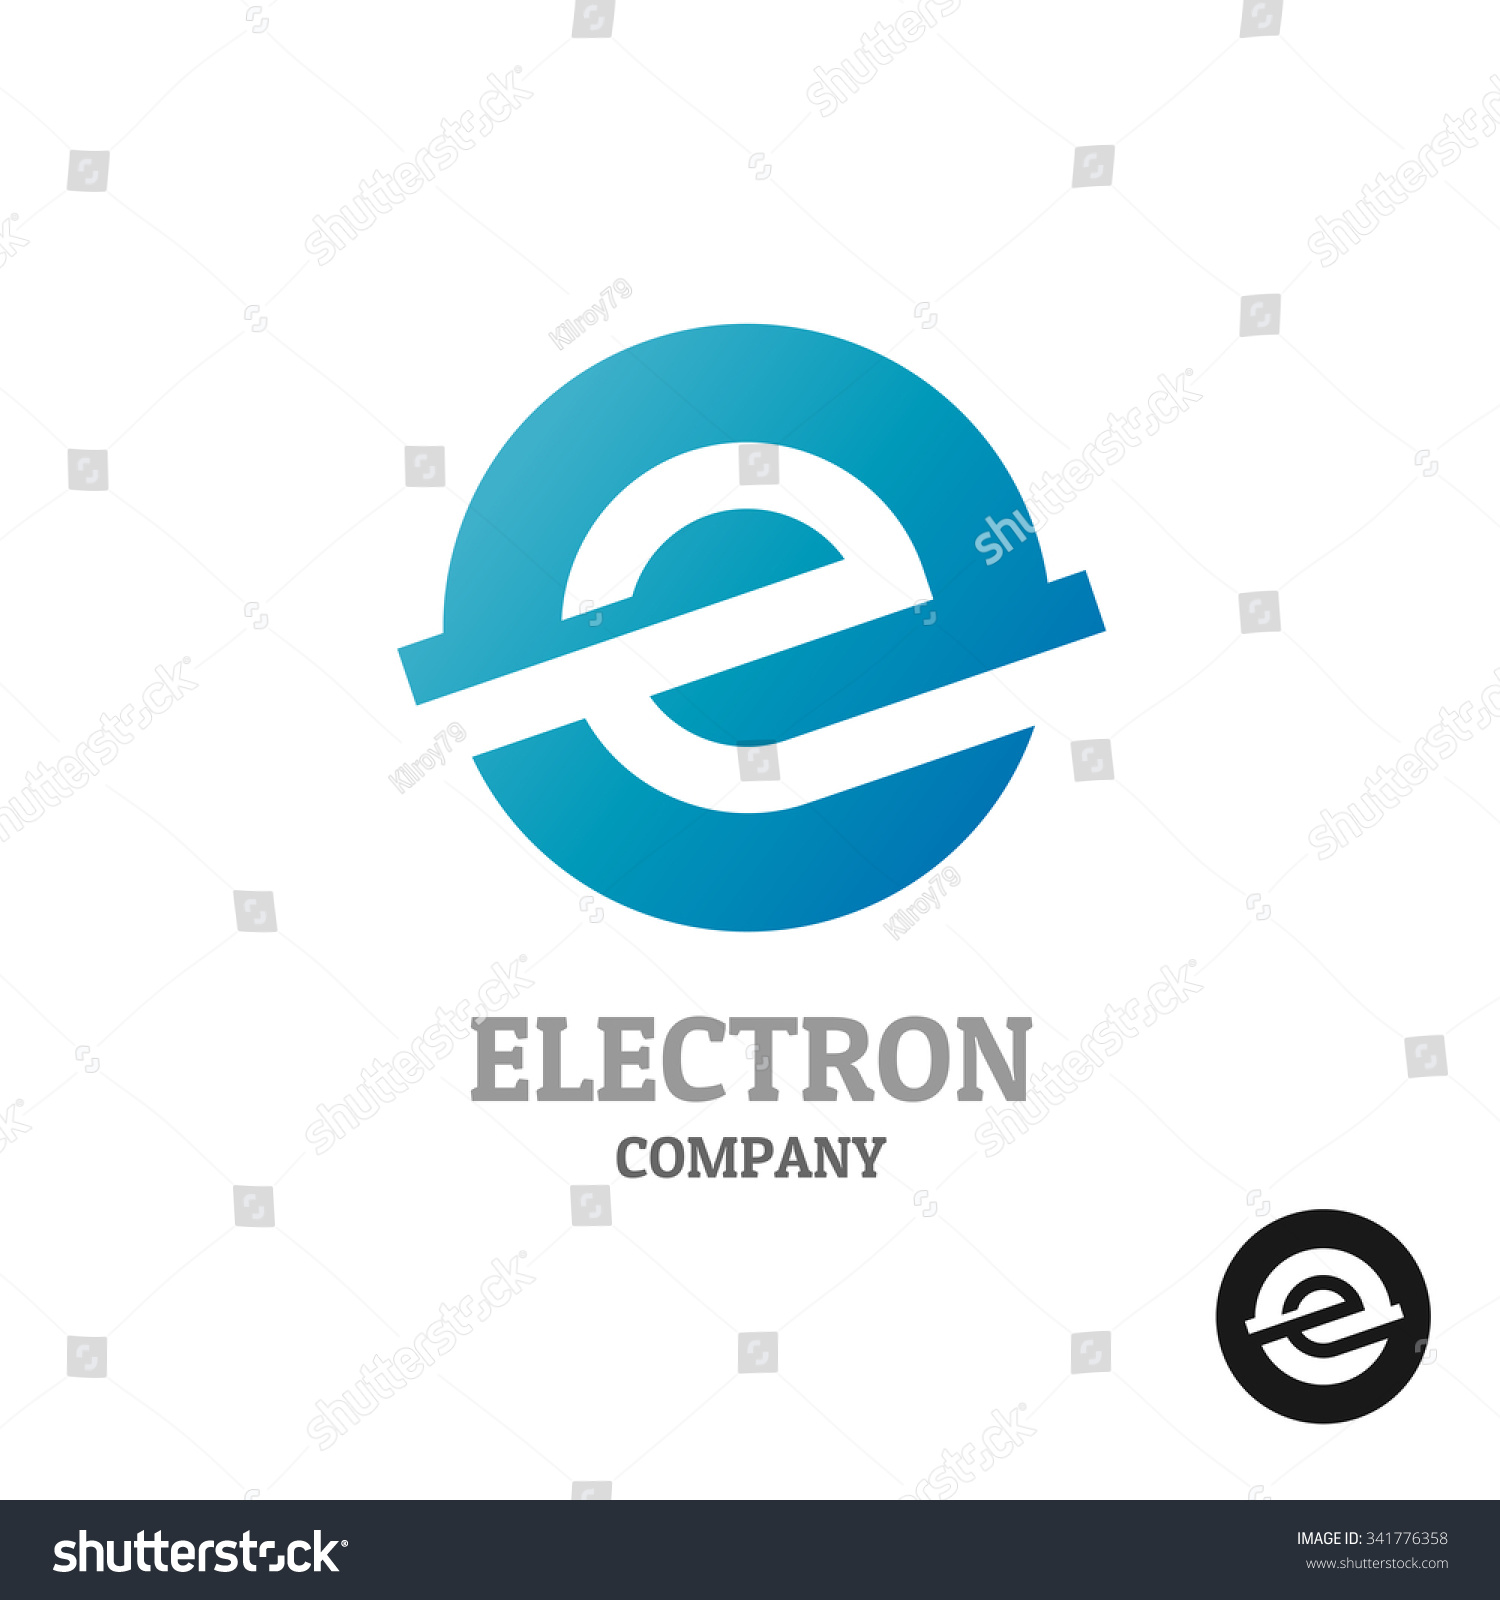 Letter E logo.Industrial tech style in a blue round sphere concept.